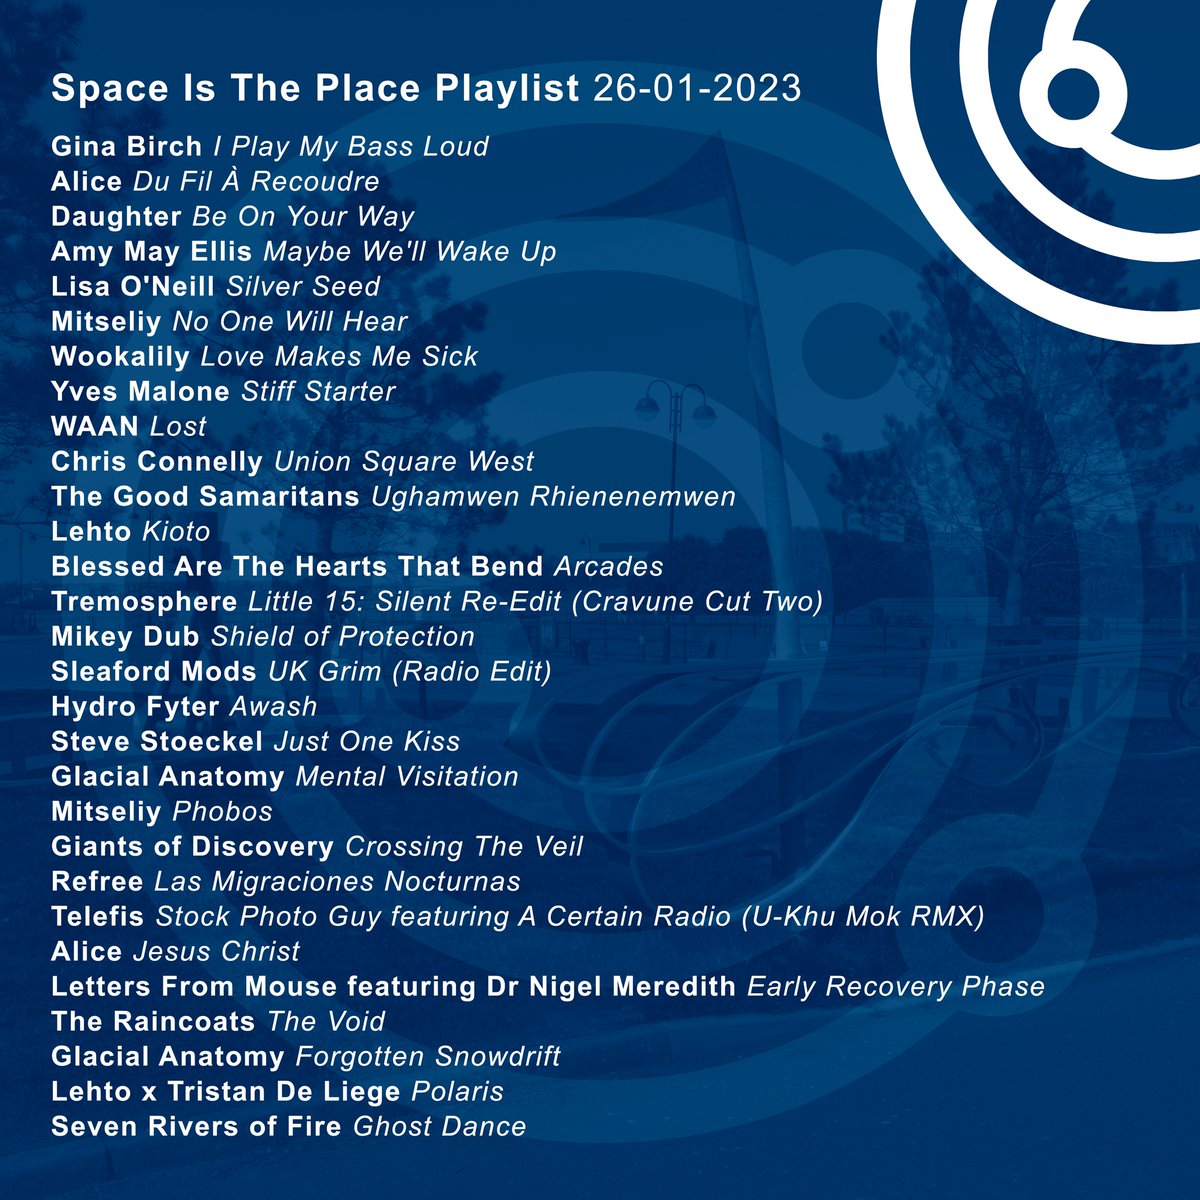 Great artists rep'd on the show 26-01-23
@telefis1961 @lfm_IDM @NigelPMeredith @amymayellisAME @Wookalily @Connelly_Chris @lehto_music @mikeydub_i @RaincoatsThe and more.

Show here
mixcloud.com/SpaceIsThePlac…